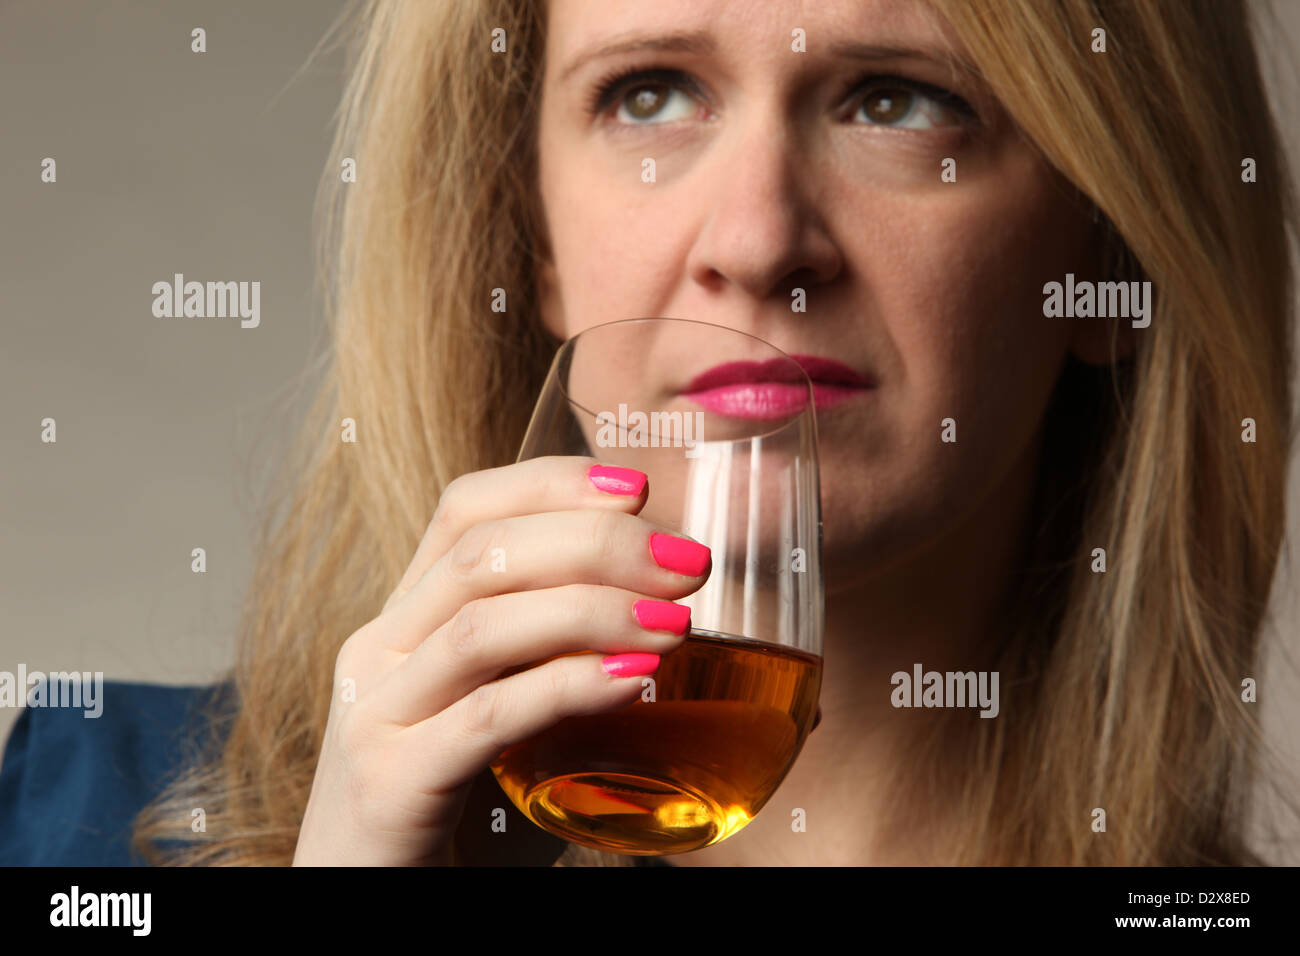 Young woman troubled by alcohol addiction, January 23, 2013, © Katharine Andriotis Stock Photo